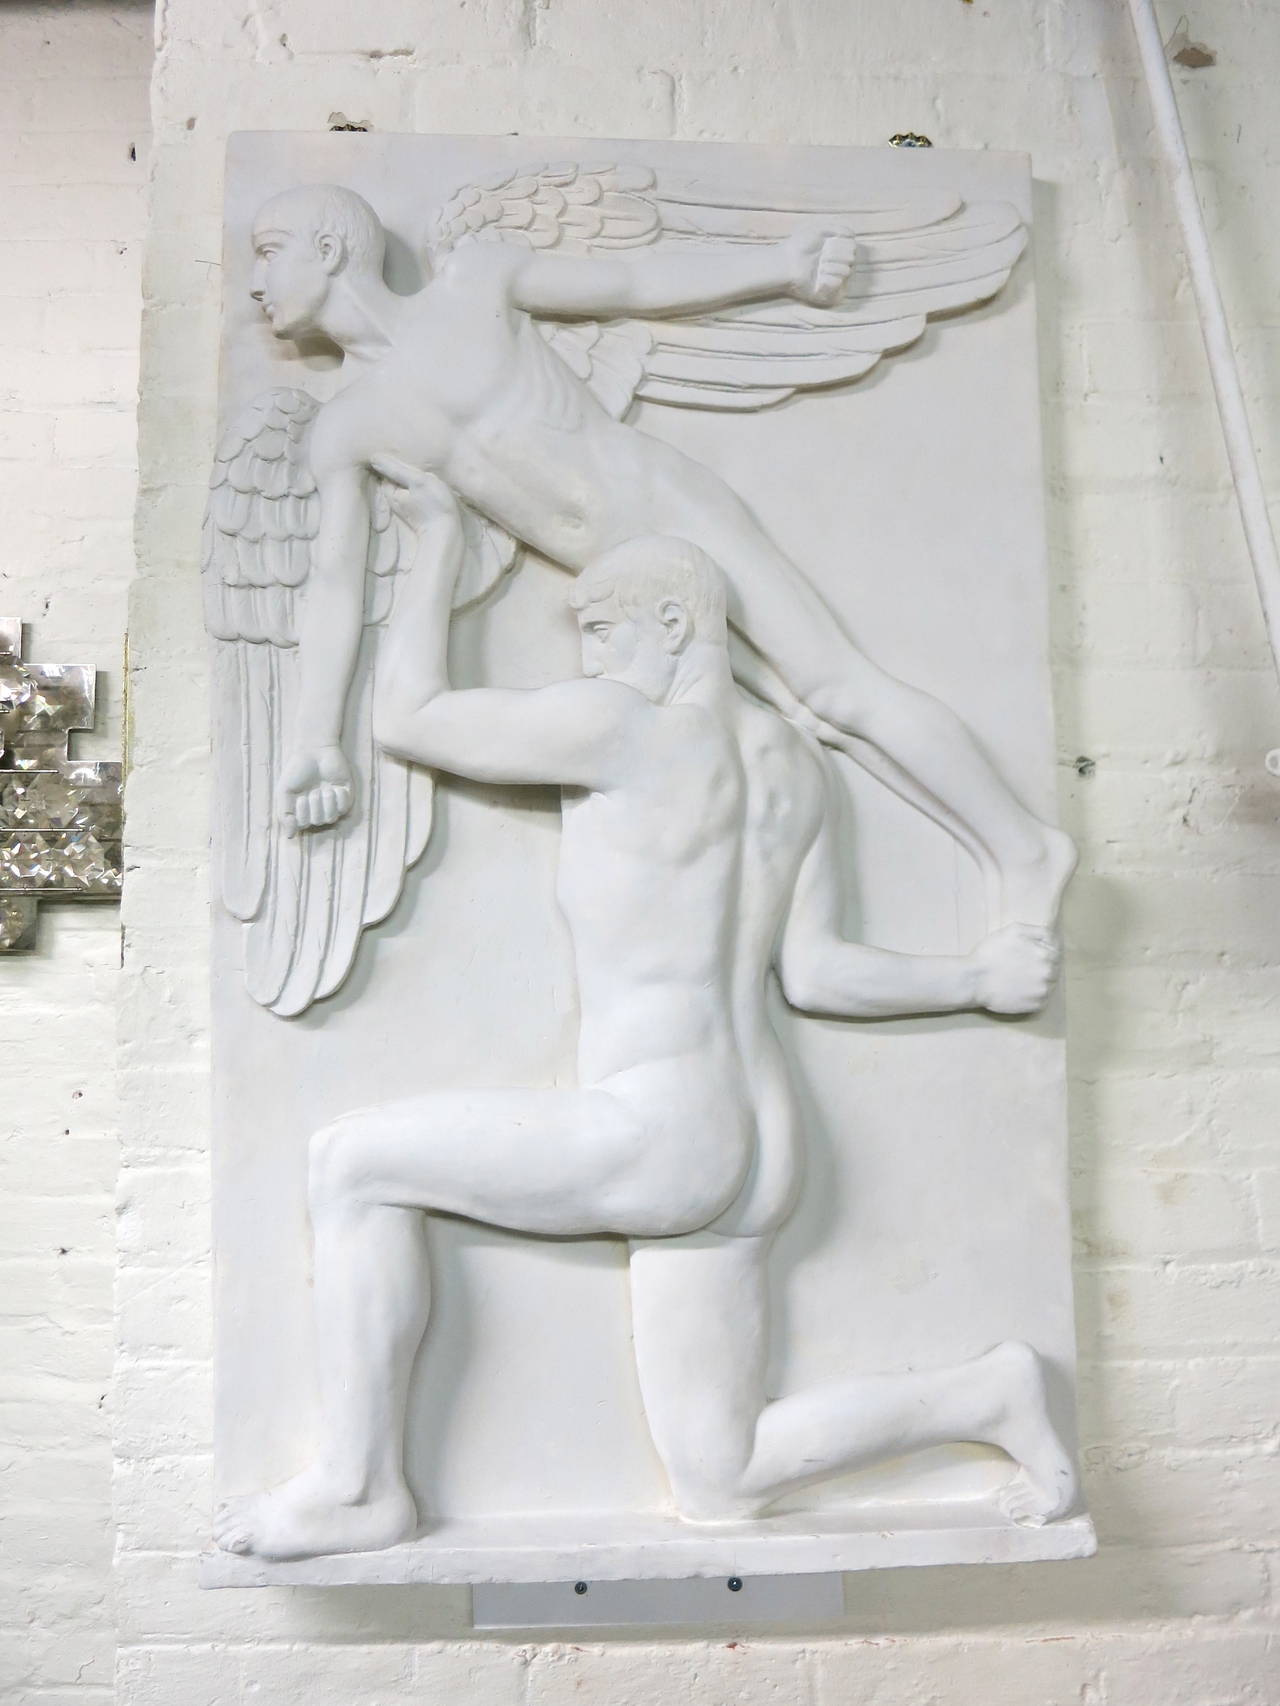 Sculpture in plaster depicting a kneeling human figure holding an angelic figure of a loft.